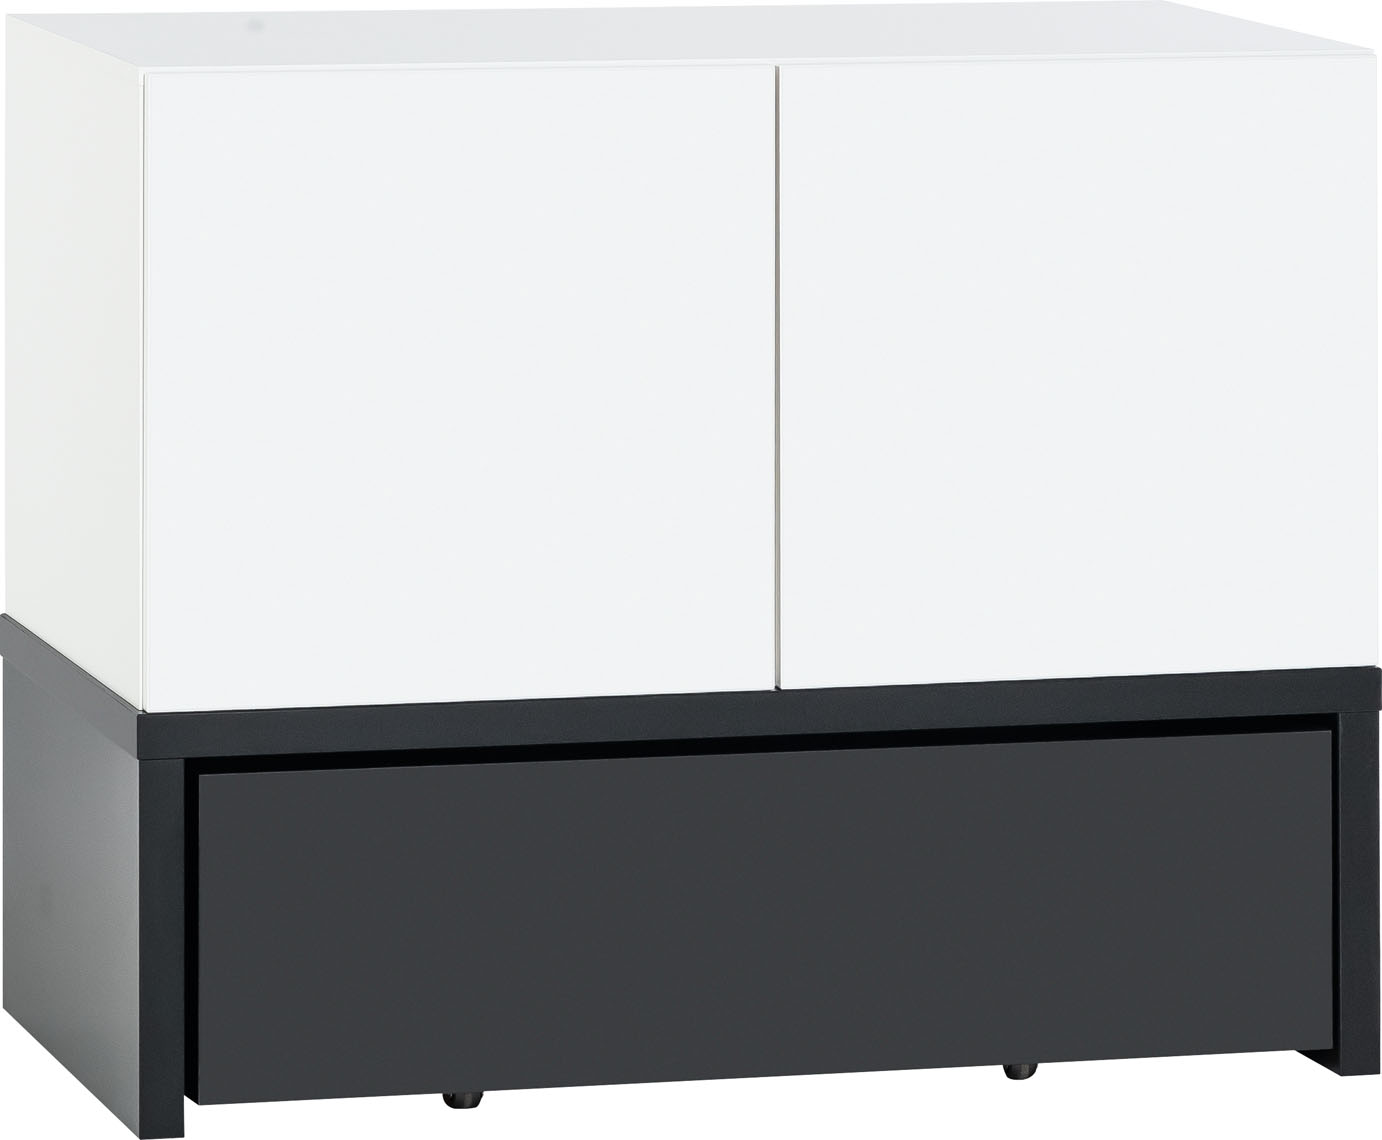 2-door cabinet with base 106x53 and drawer